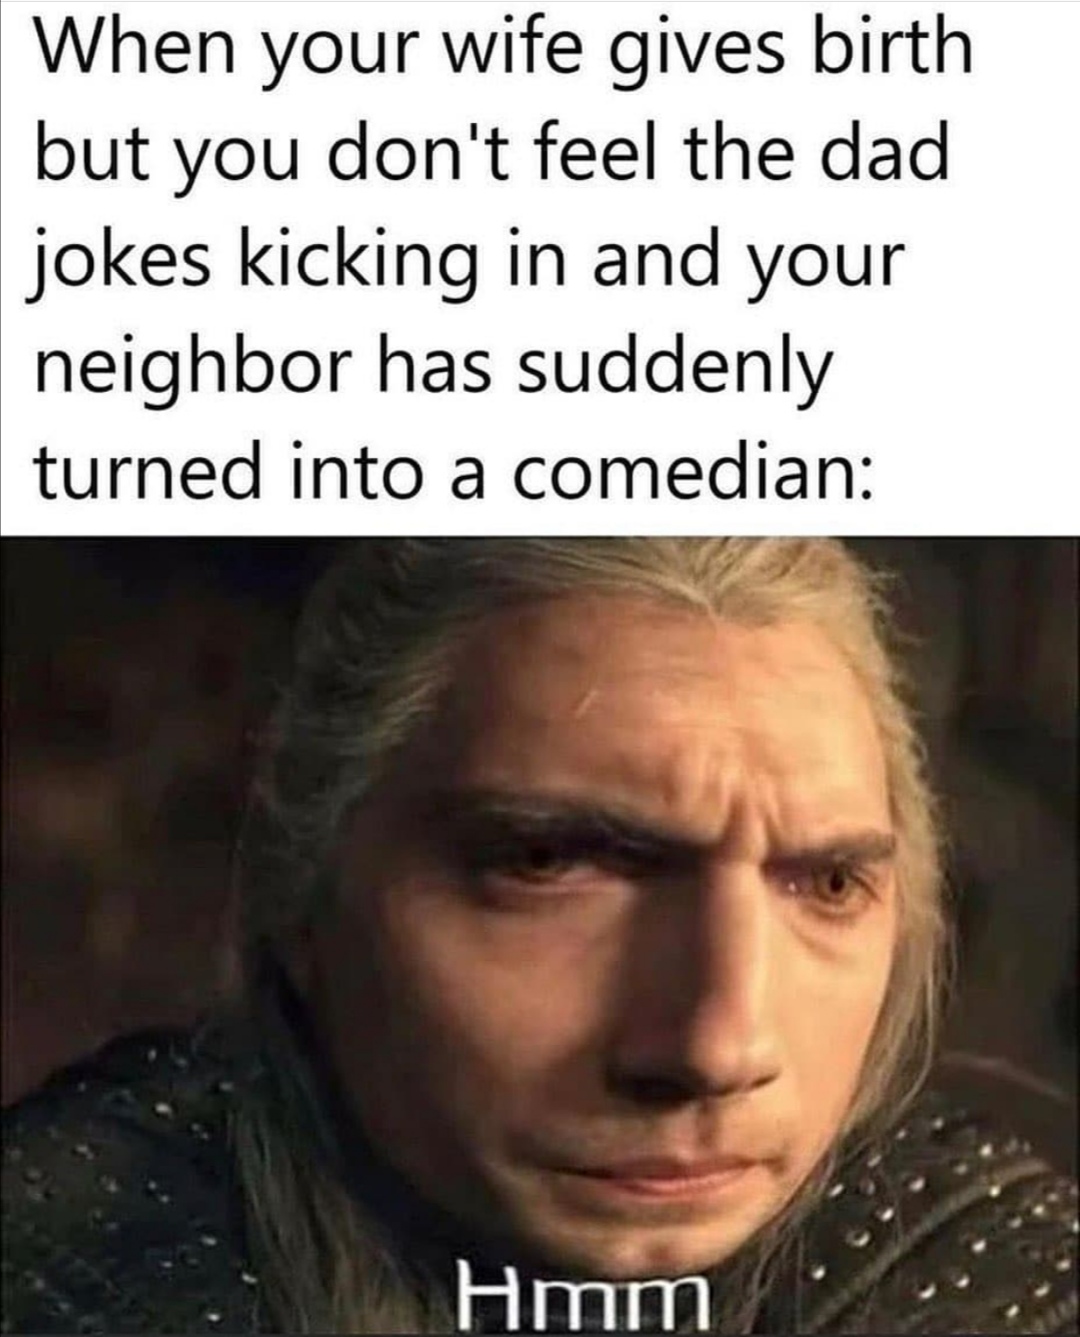 Meme - When your wife gives birth but you don't feel the dad jokes kicking in and your neighbor has suddenly turned into a comedian Hmm